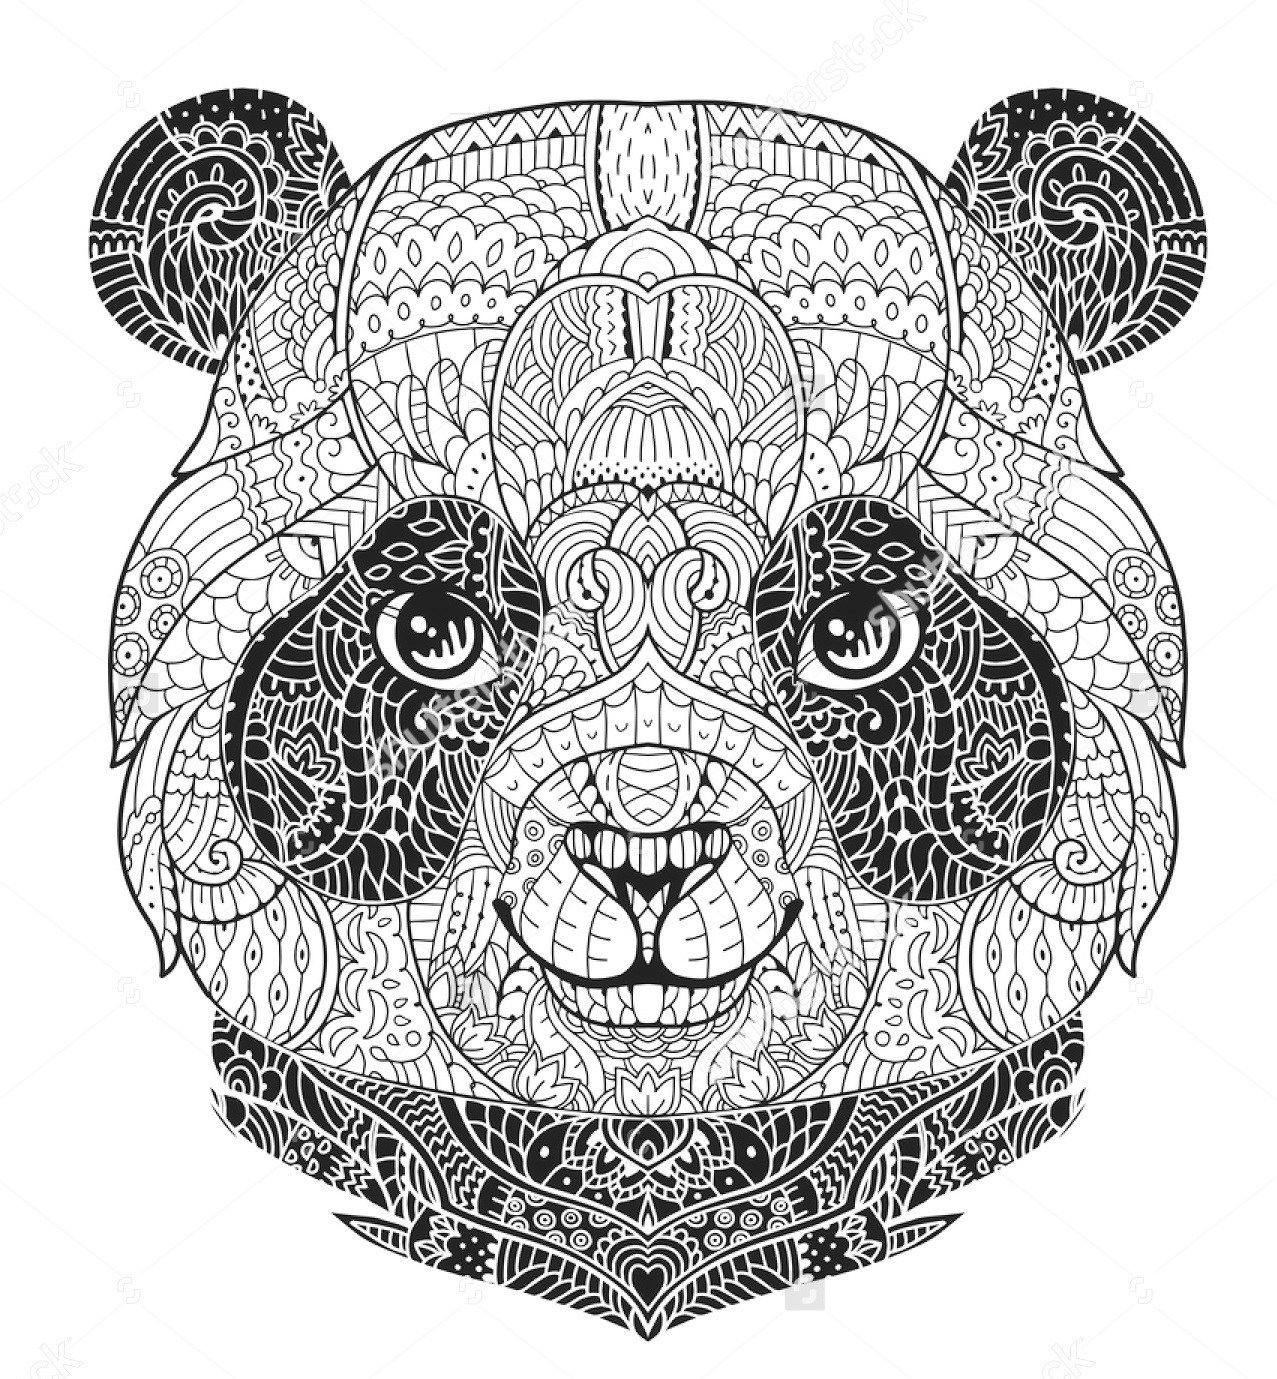 Download Panda Coloring Pages - Best Coloring Pages For Kids